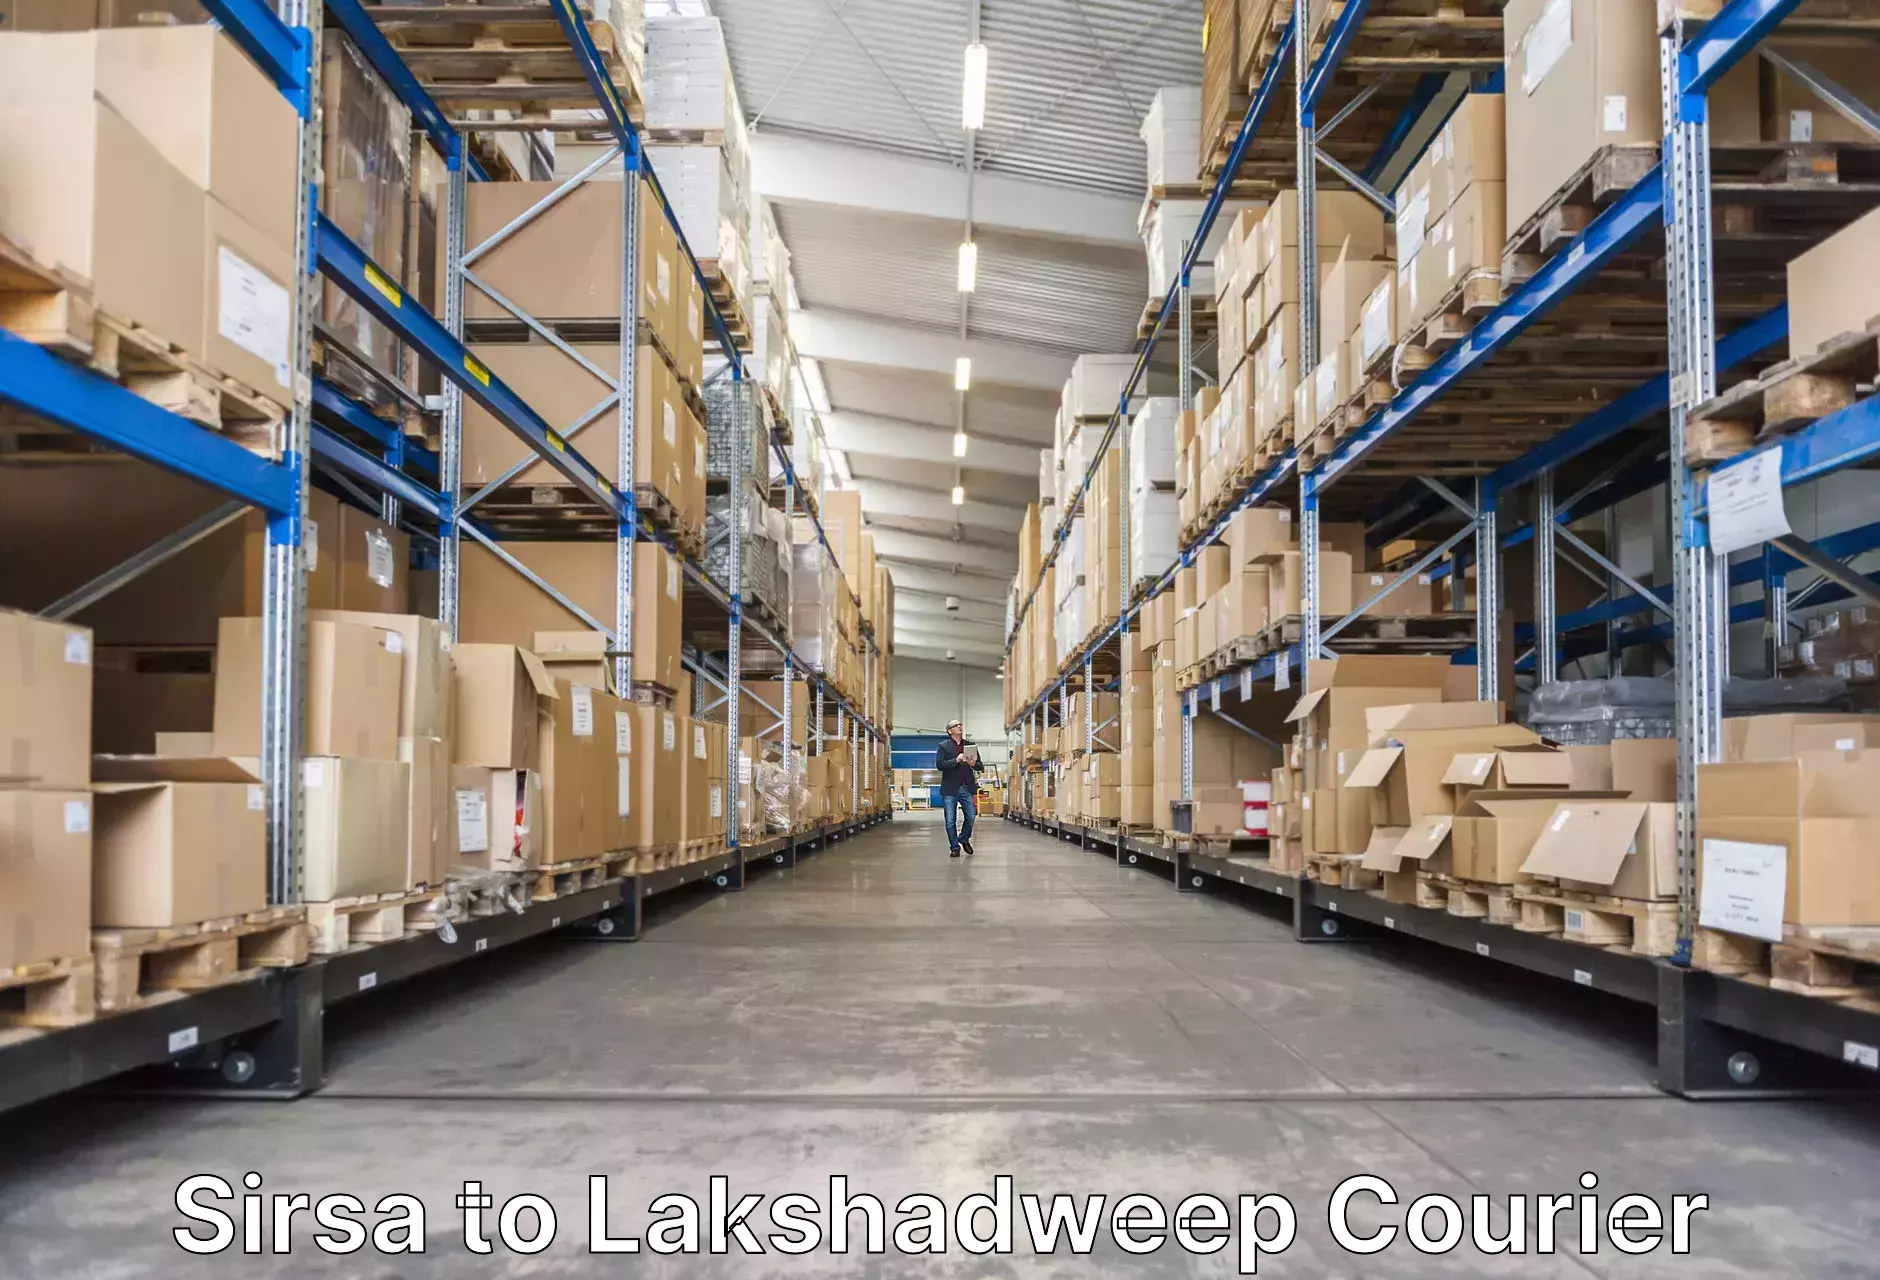 Luggage shipment specialists Sirsa to Lakshadweep